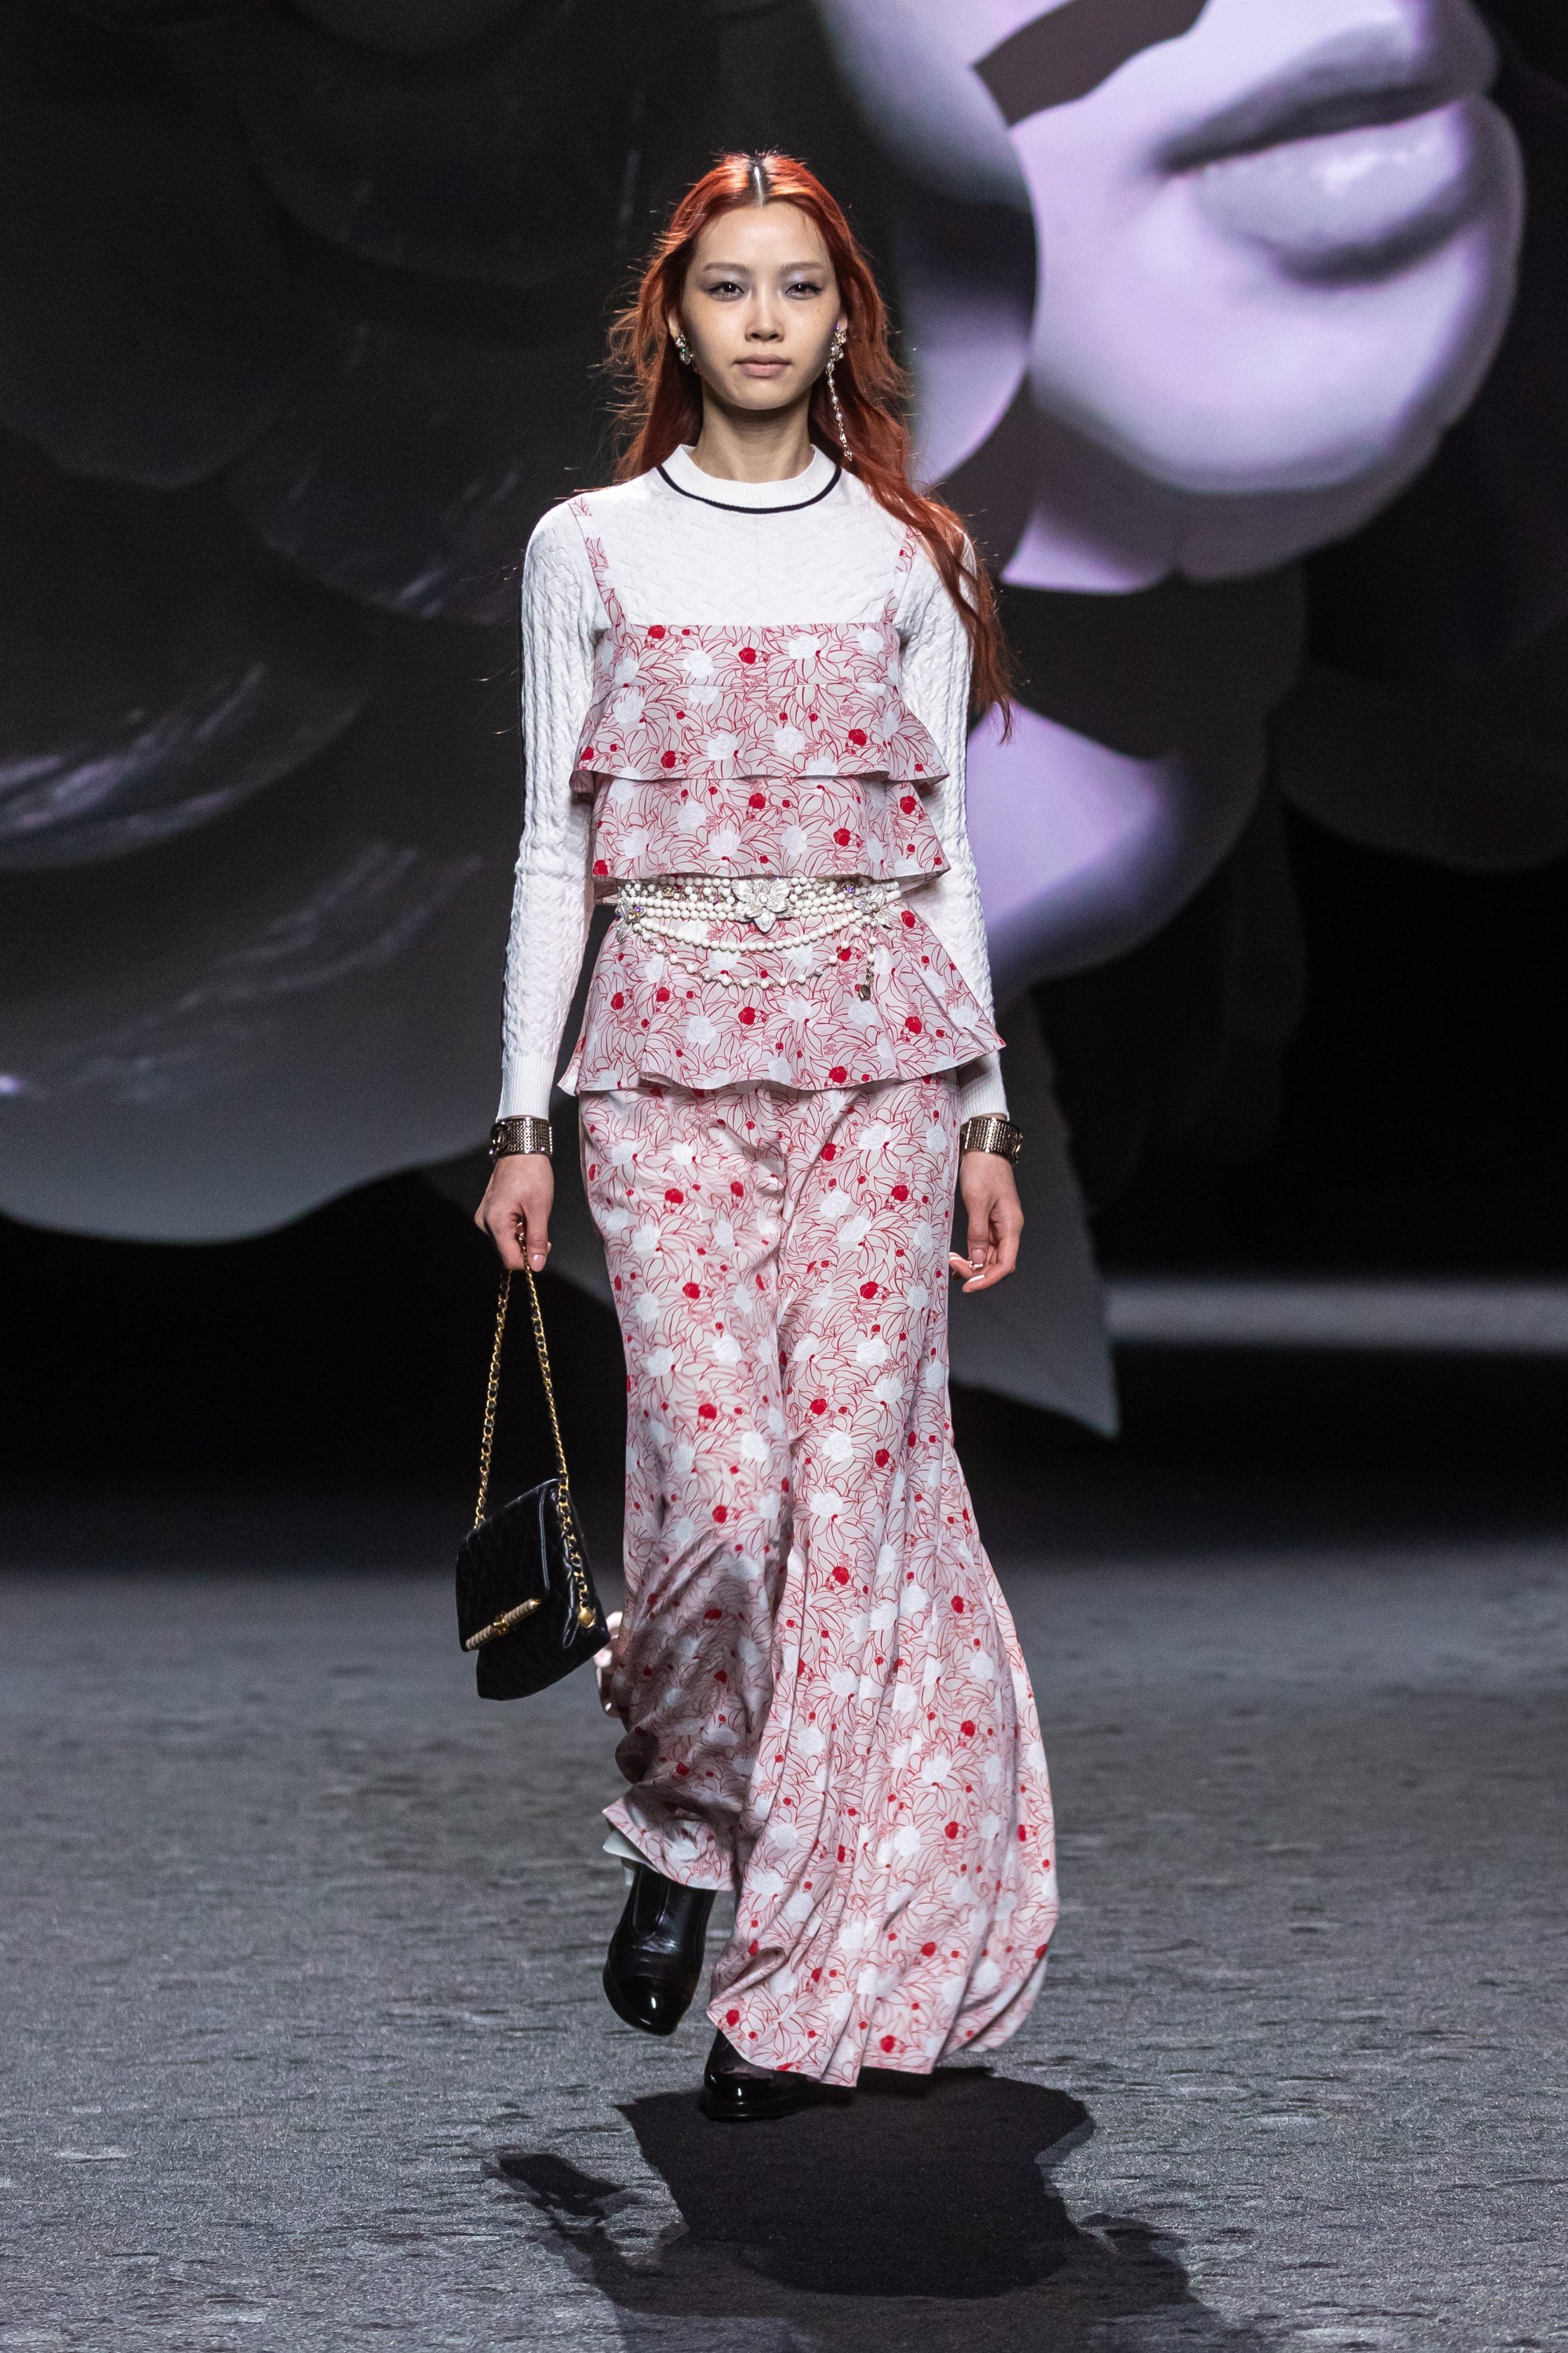 Paris Fashion Week 2023: Chanel closed out with a burst of camellia blooms,  Prada's sister brand Miu Miu disrupted the runways, and Penelope Cruz  reminisced about Karl Lagerfeld